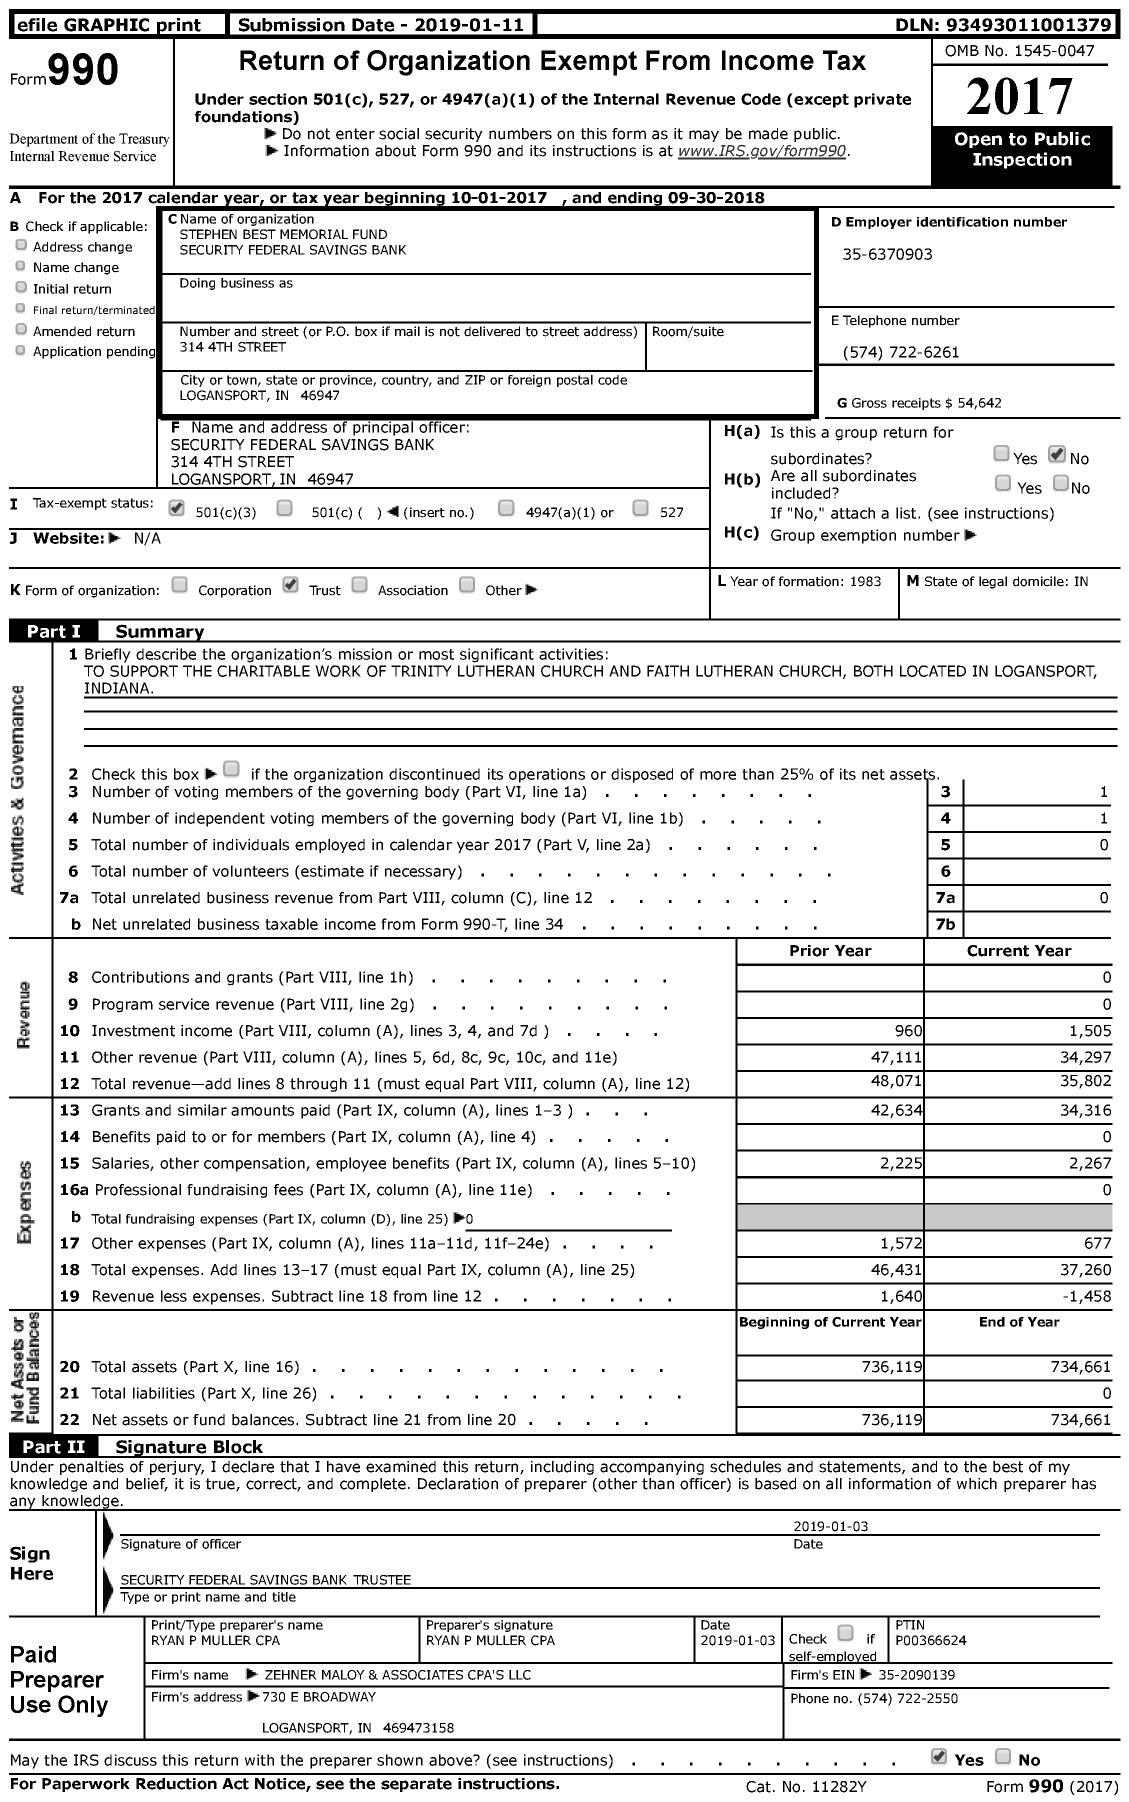 Image of first page of 2017 Form 990 for Stephen Best Memorial Fund Security Federal Savings Bank